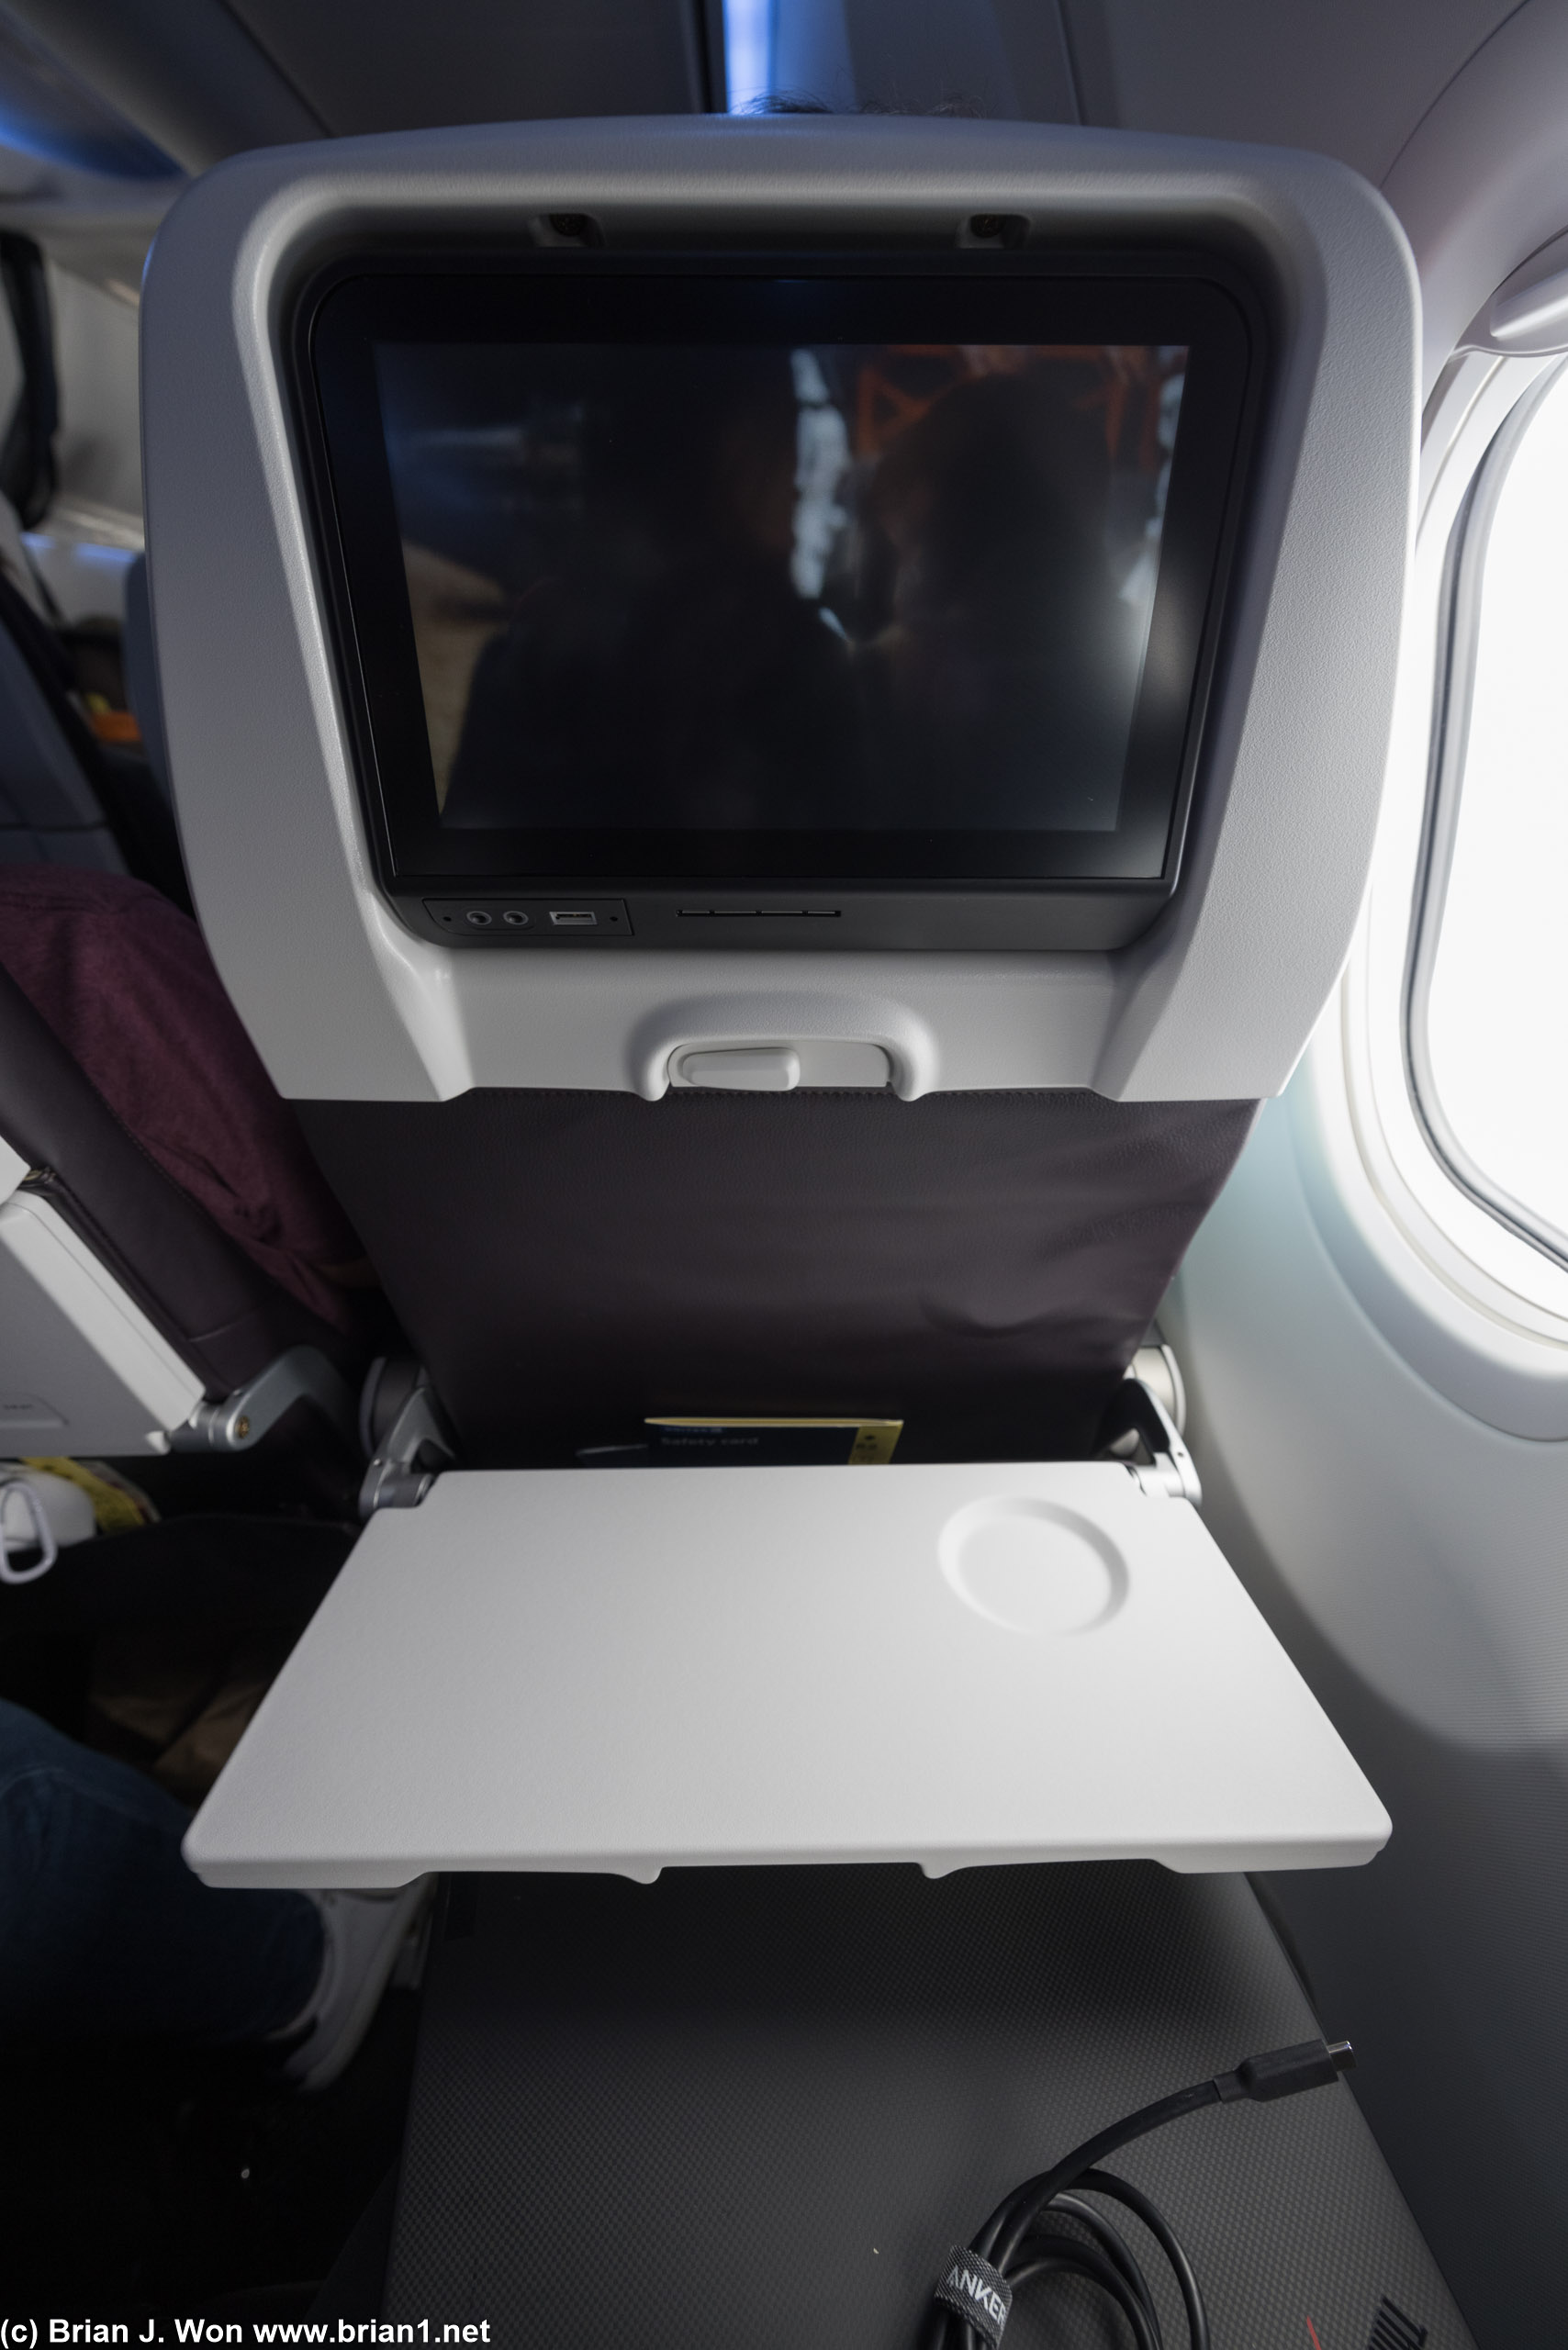 Tray table is laughably small.